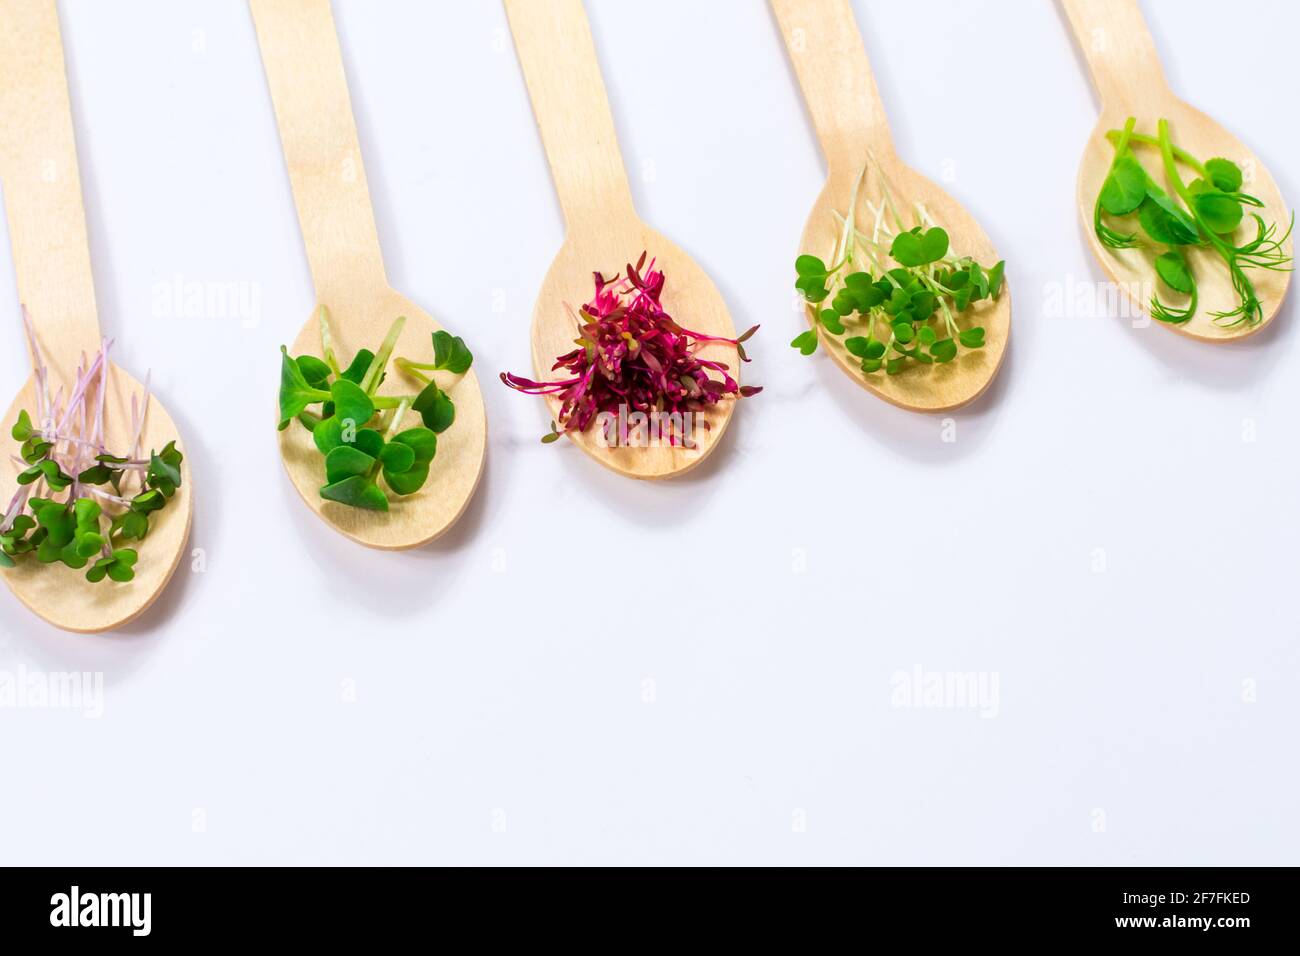 Micro greens of peas, red cabbage, amaranth, mustard, radish in assortment on wooden spoons arranged diagonally on a white background. Place for an Stock Photo